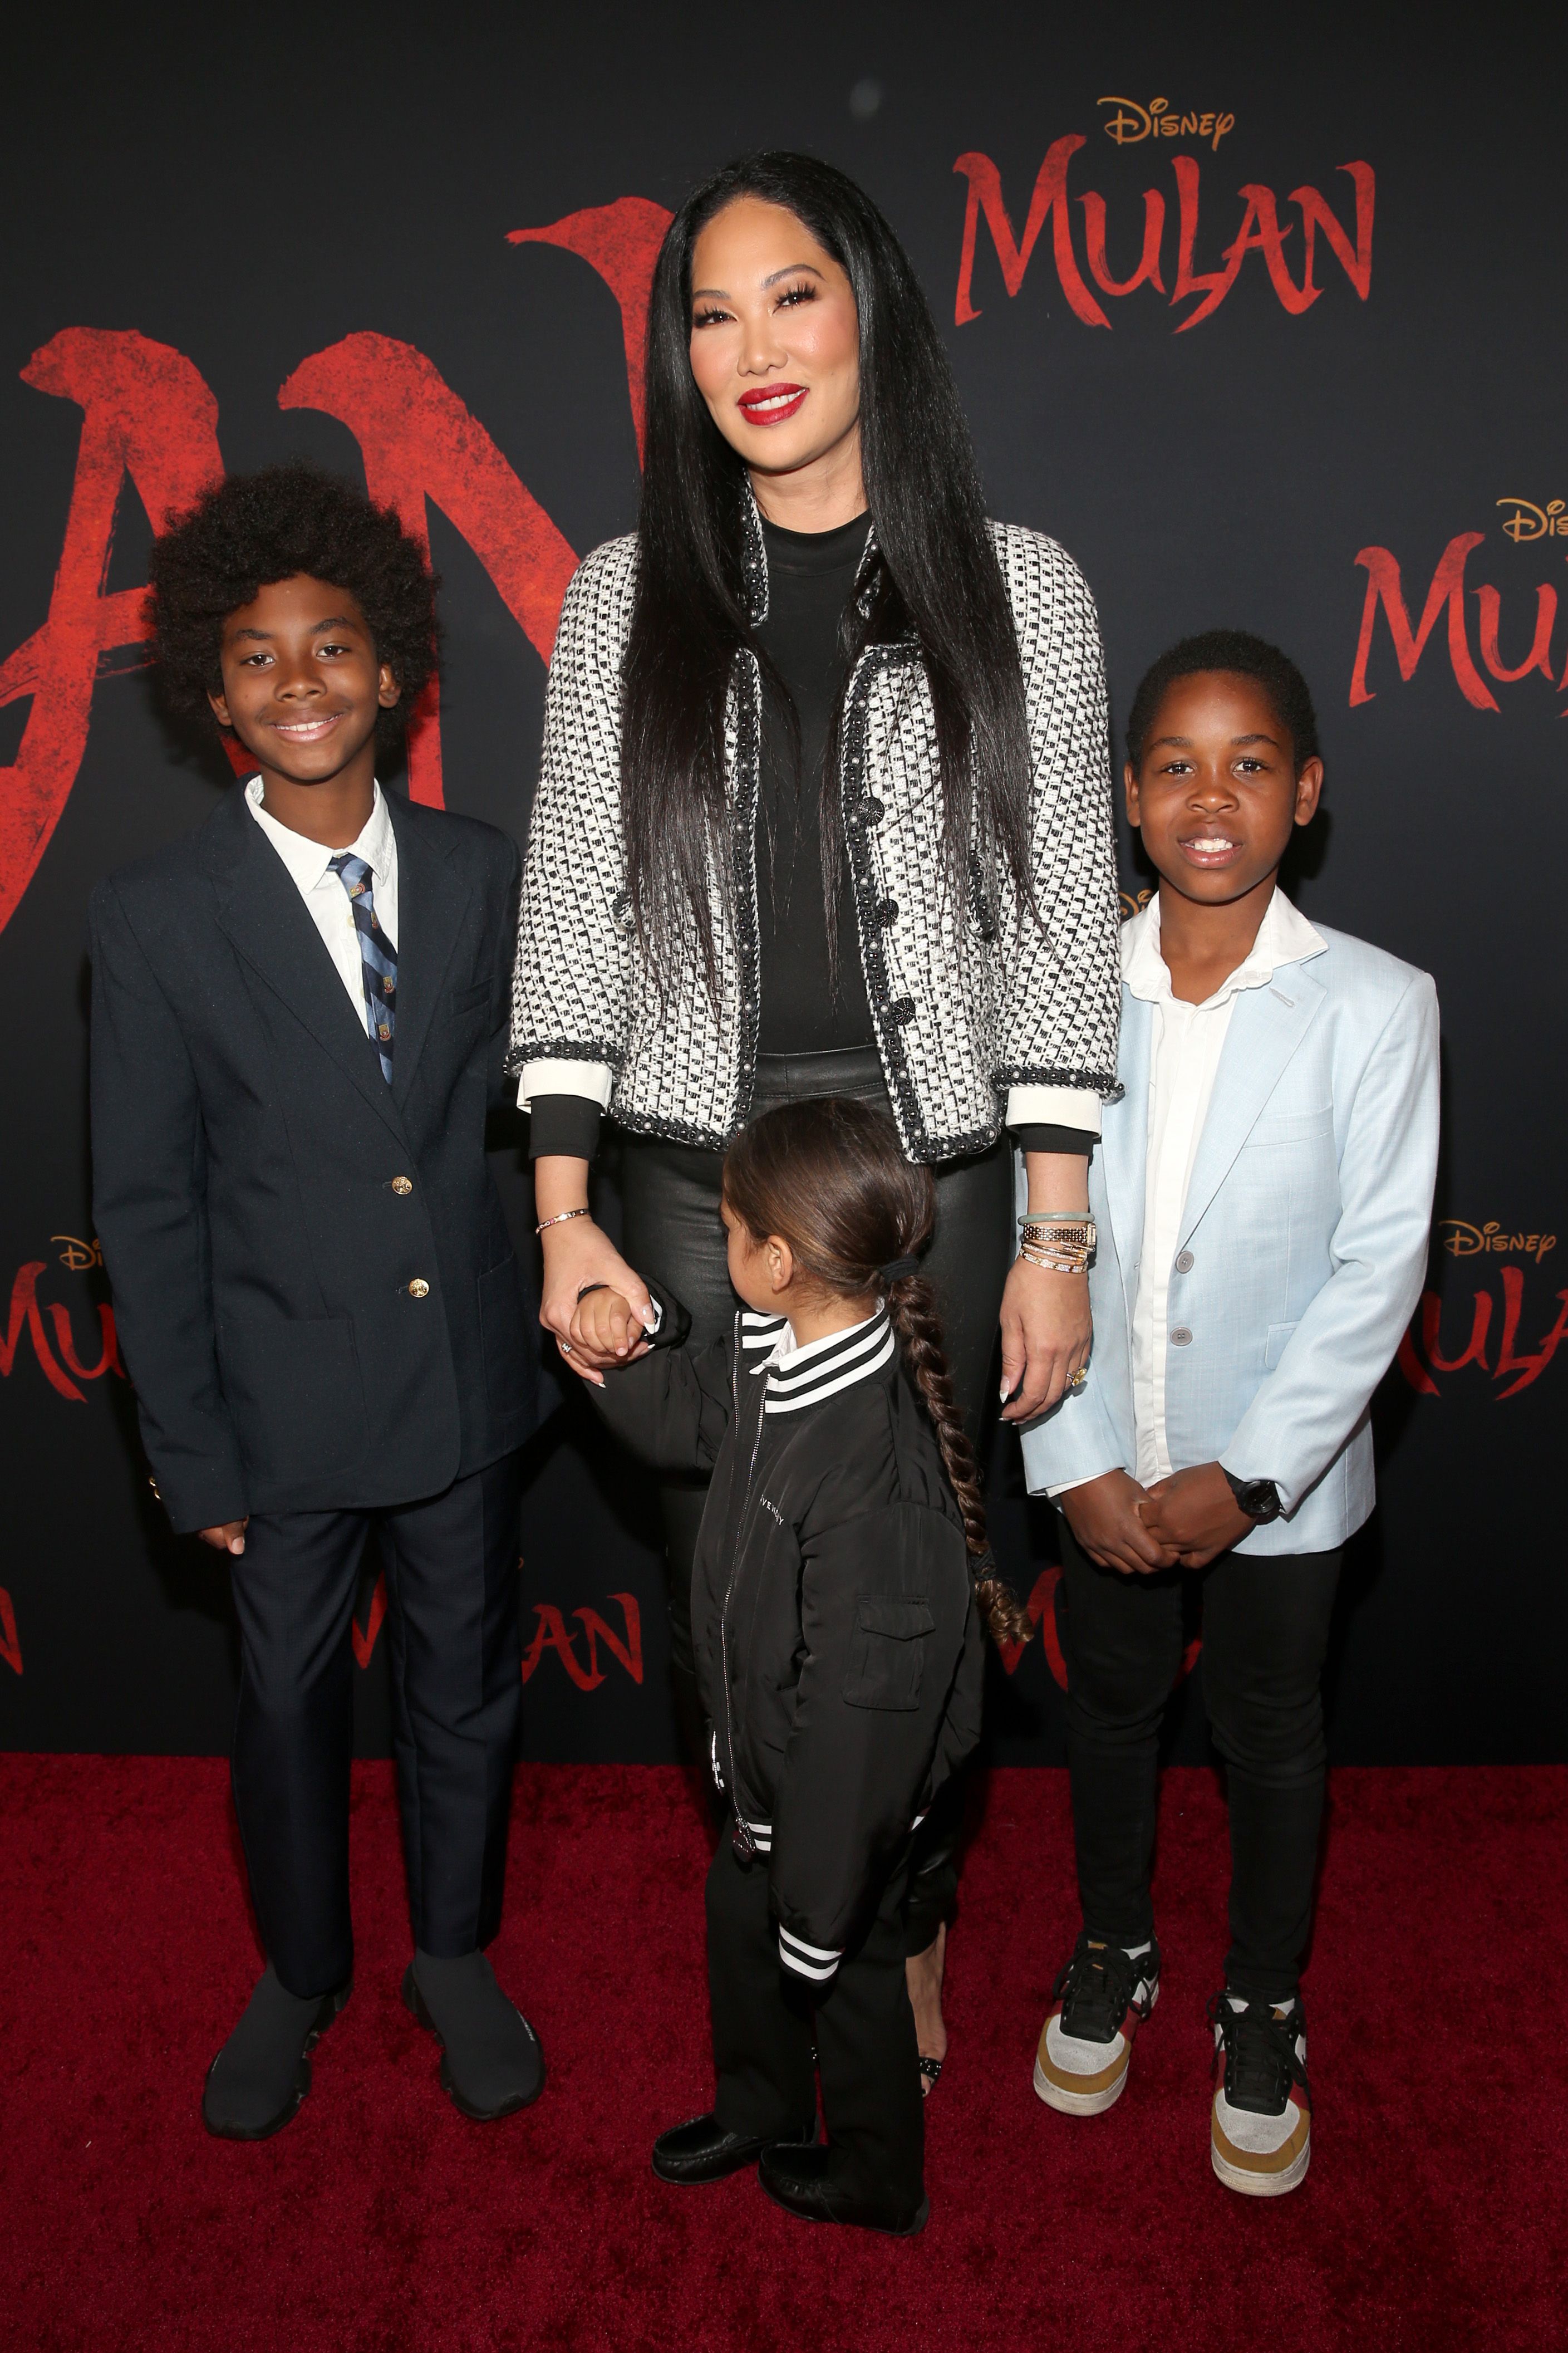 Kimora Lee Simmons and sons attend the world premiere of Disney's "Mulan" at the Dolby Theatre on March 9, 2020 in Hollywood, California | Source: Getty Images